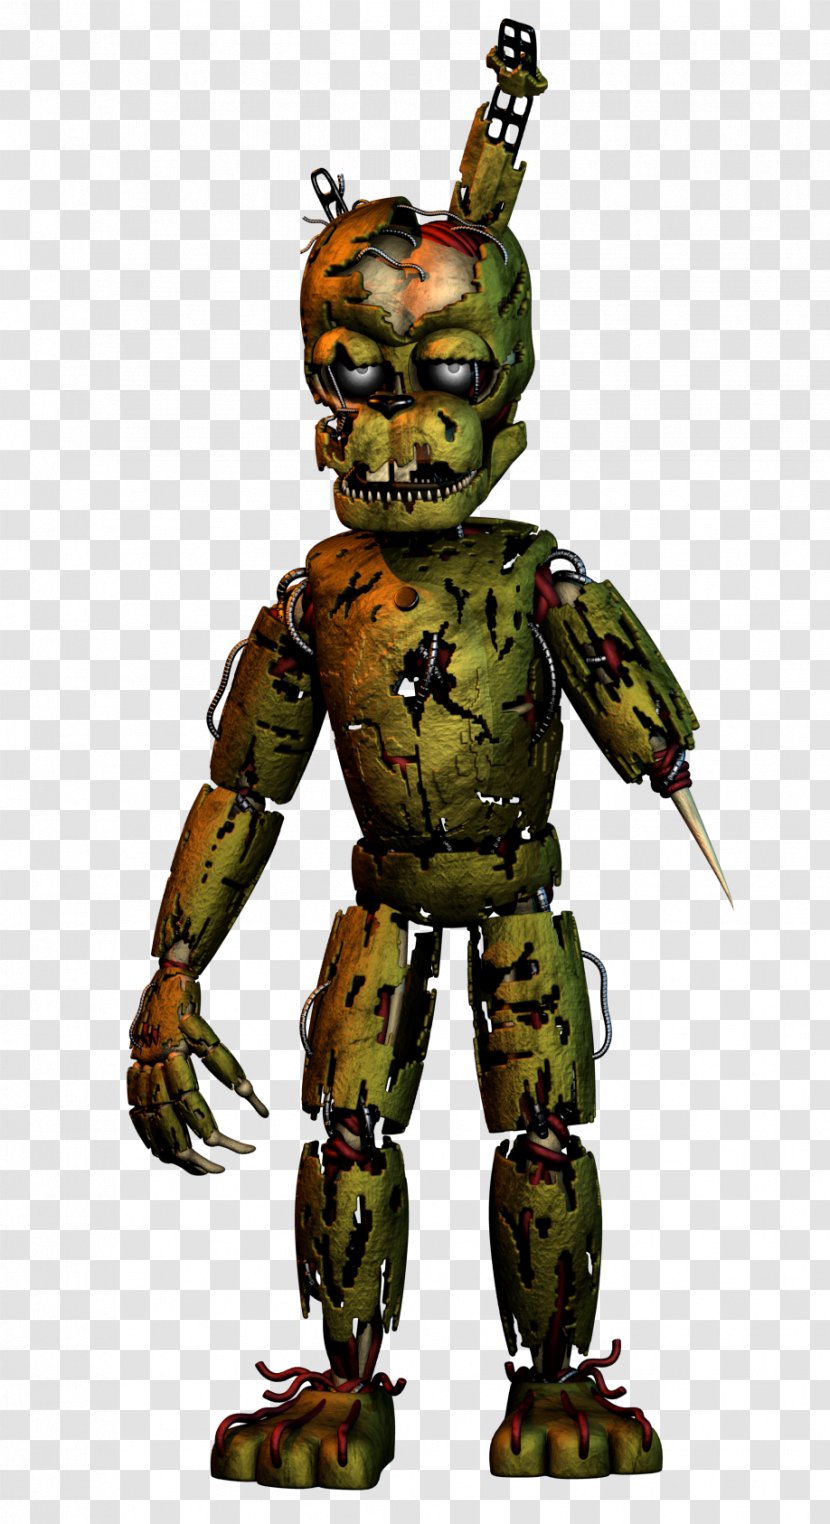 Five Nights At Freddy's 3 Freddy's: Sister Location 2 4 - Mythical Creature - Pizzaria Transparent PNG